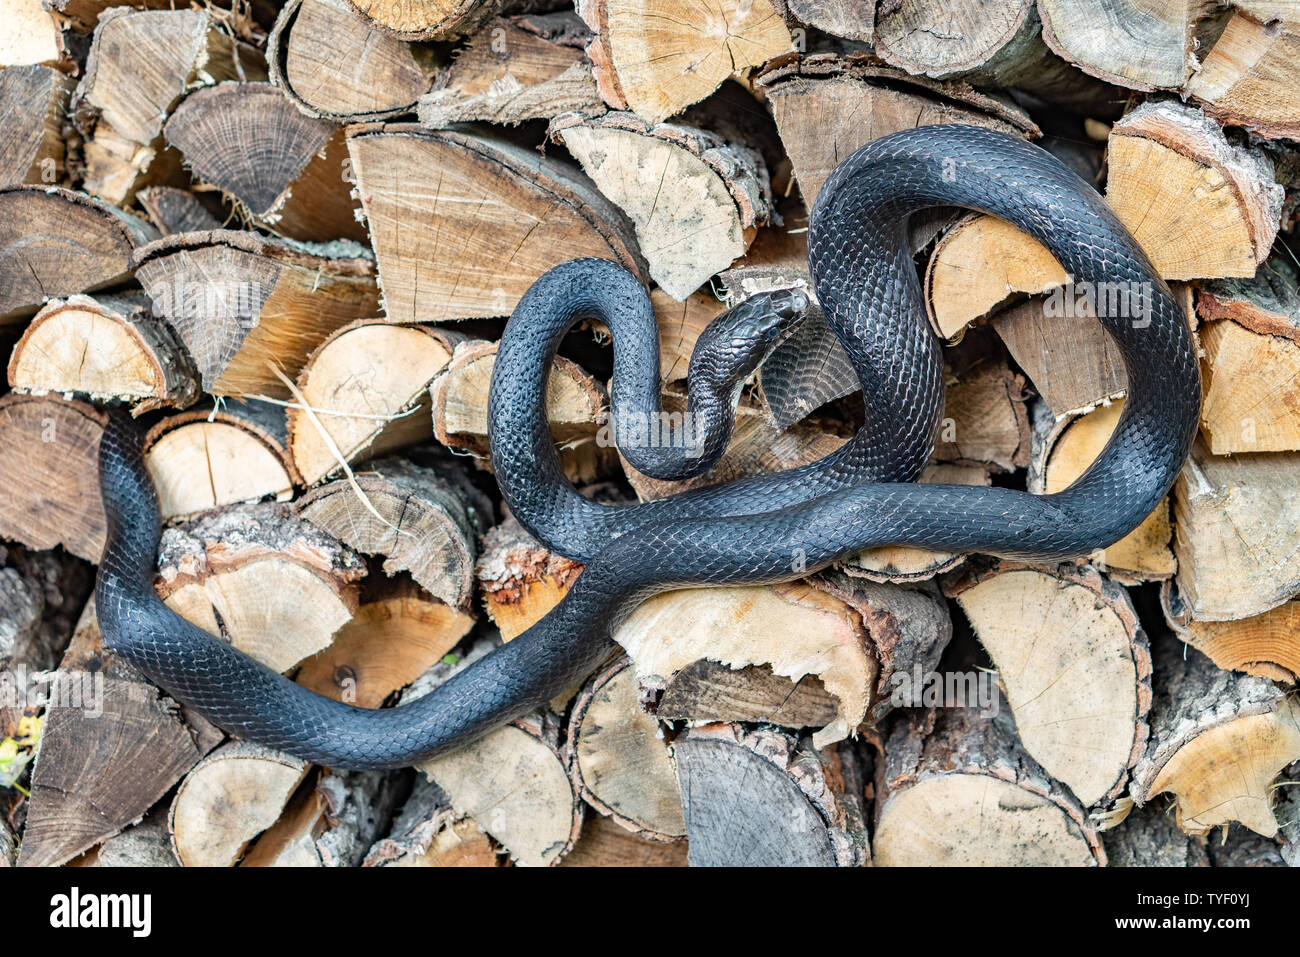 A beautiful black rat snake curled up on a pile of  split logs Stock Photo